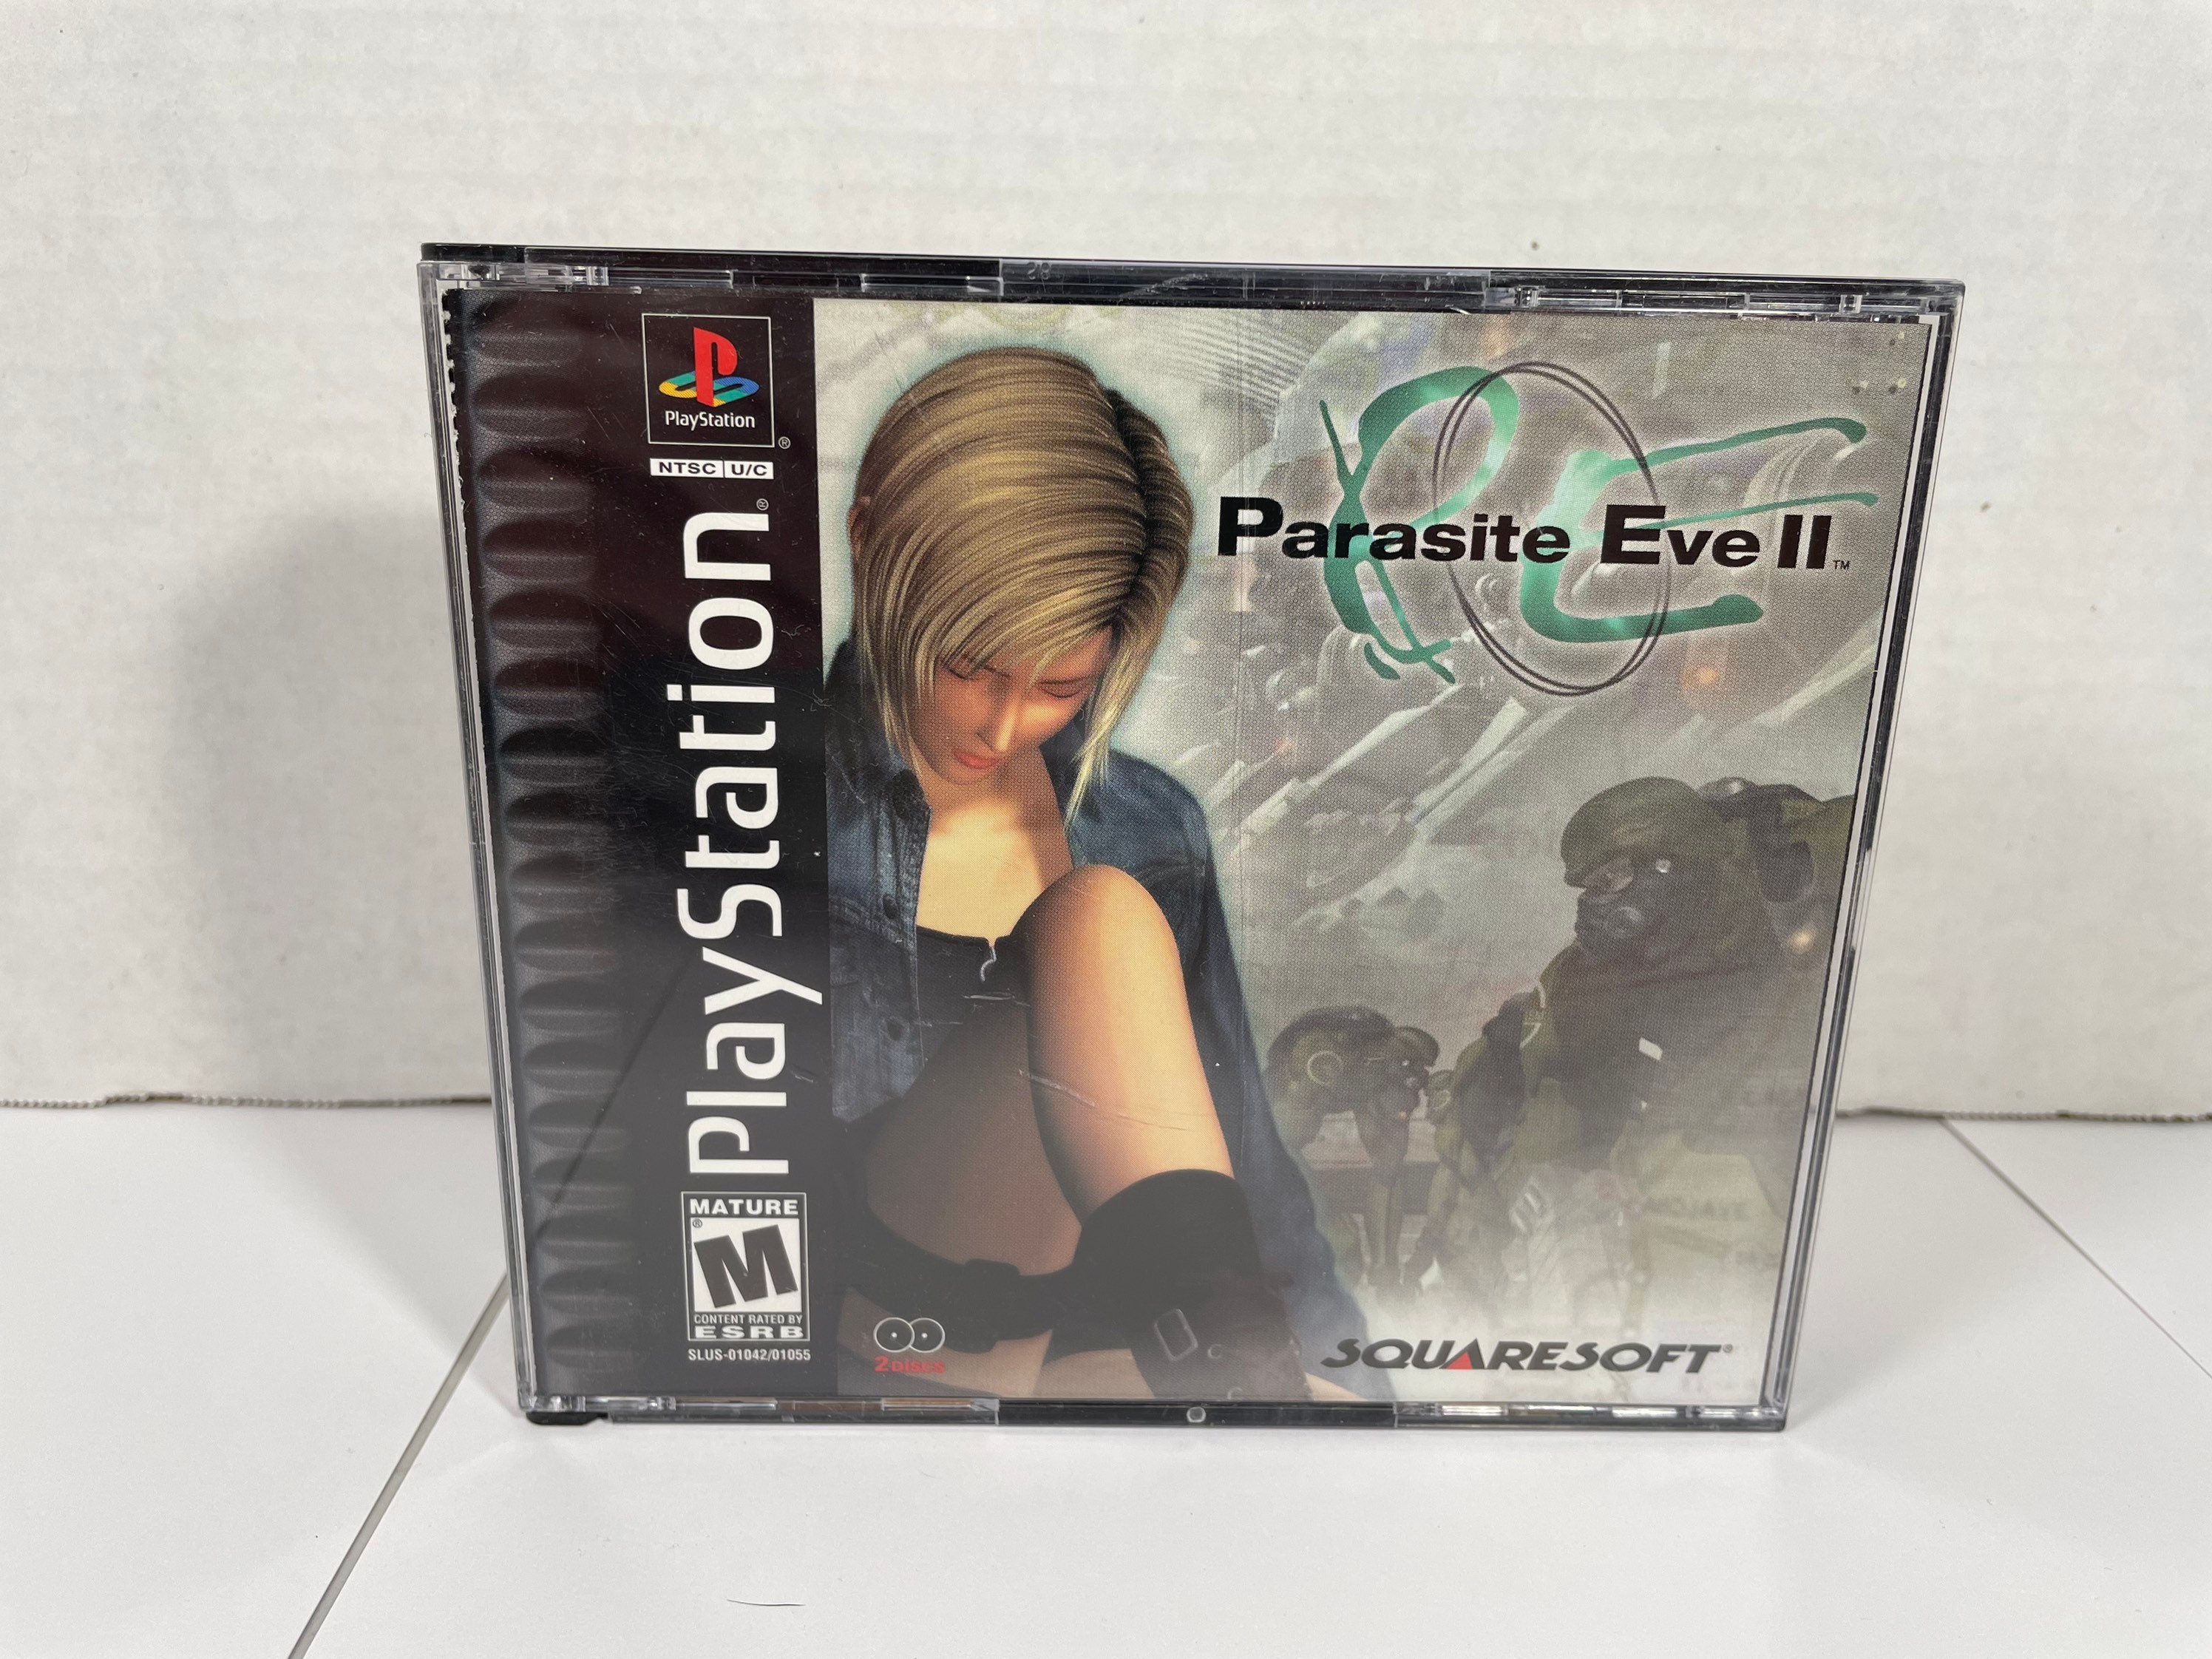 A Look Back at Parasite Eve II (PS1) - Wackoid